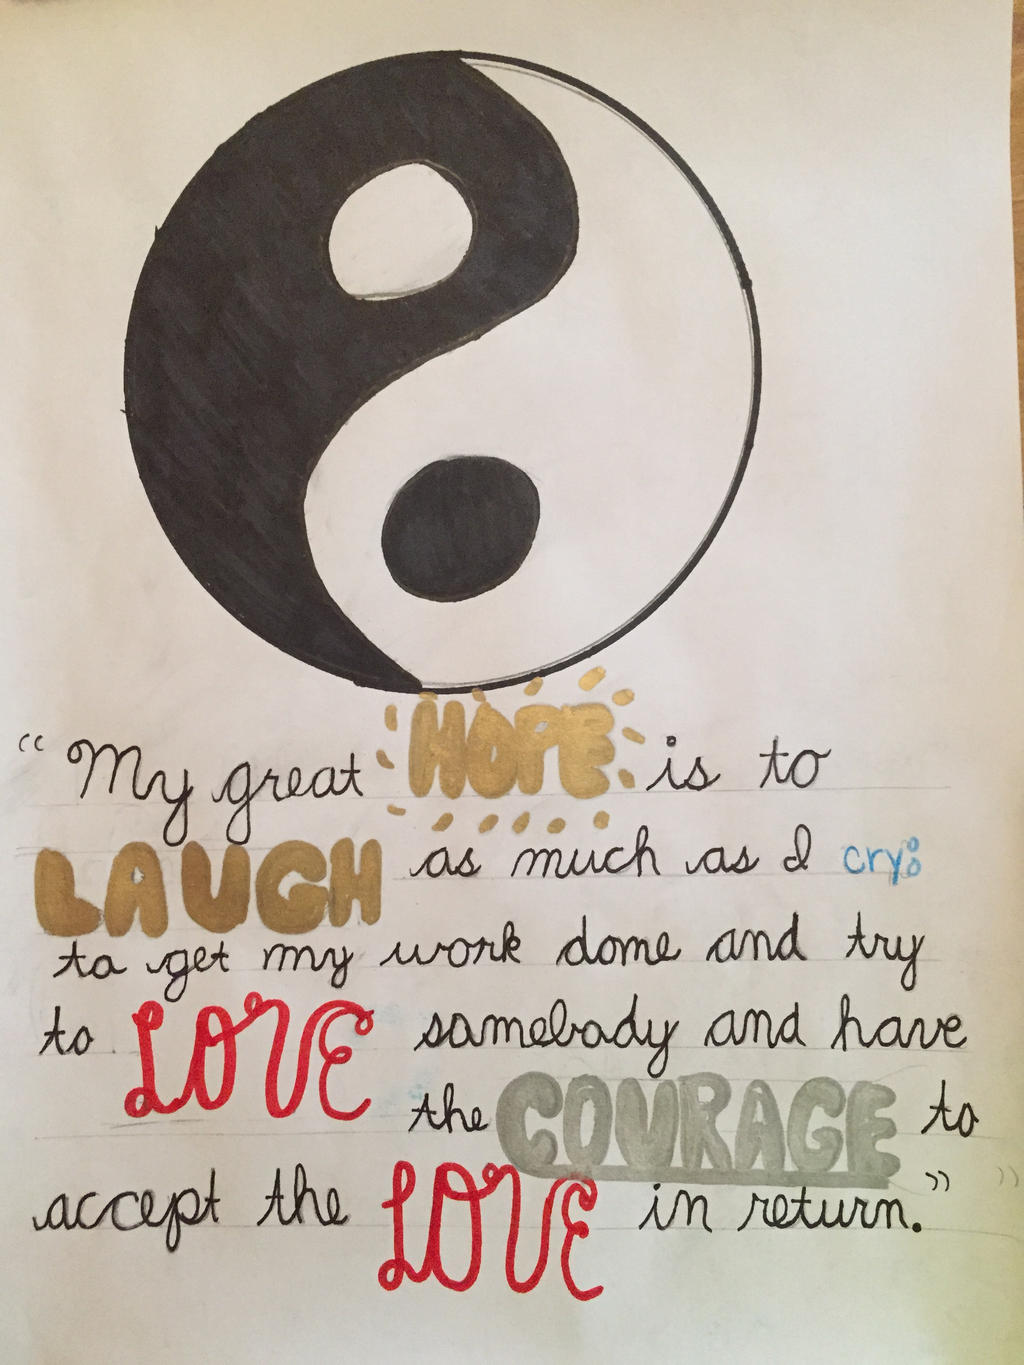 ying yang quotequinnerss on deviantart